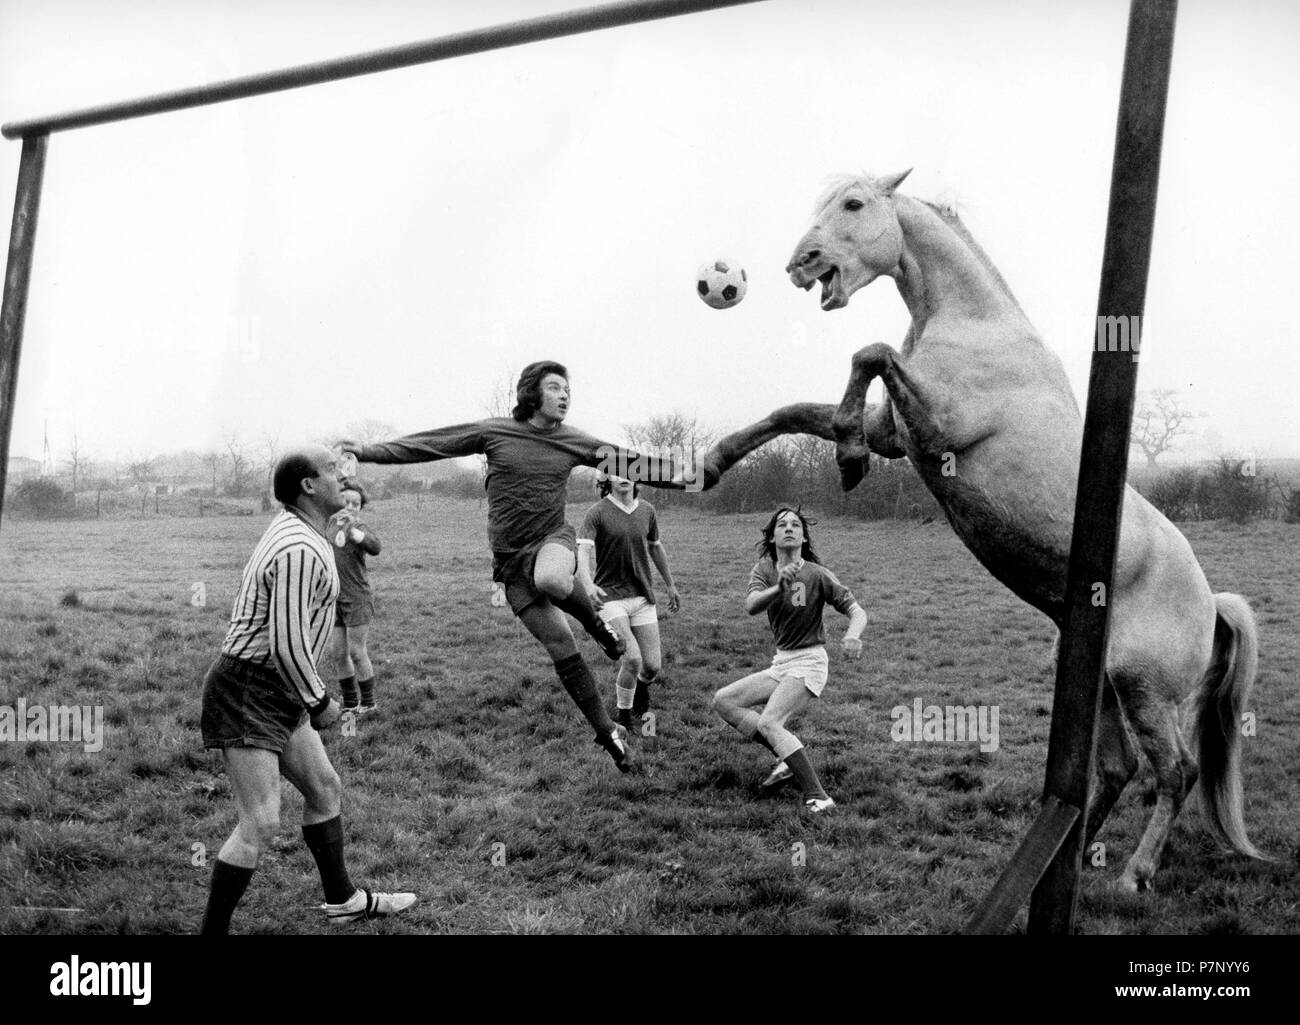 Horse plays football with men, England, Great Britain Stock Photo